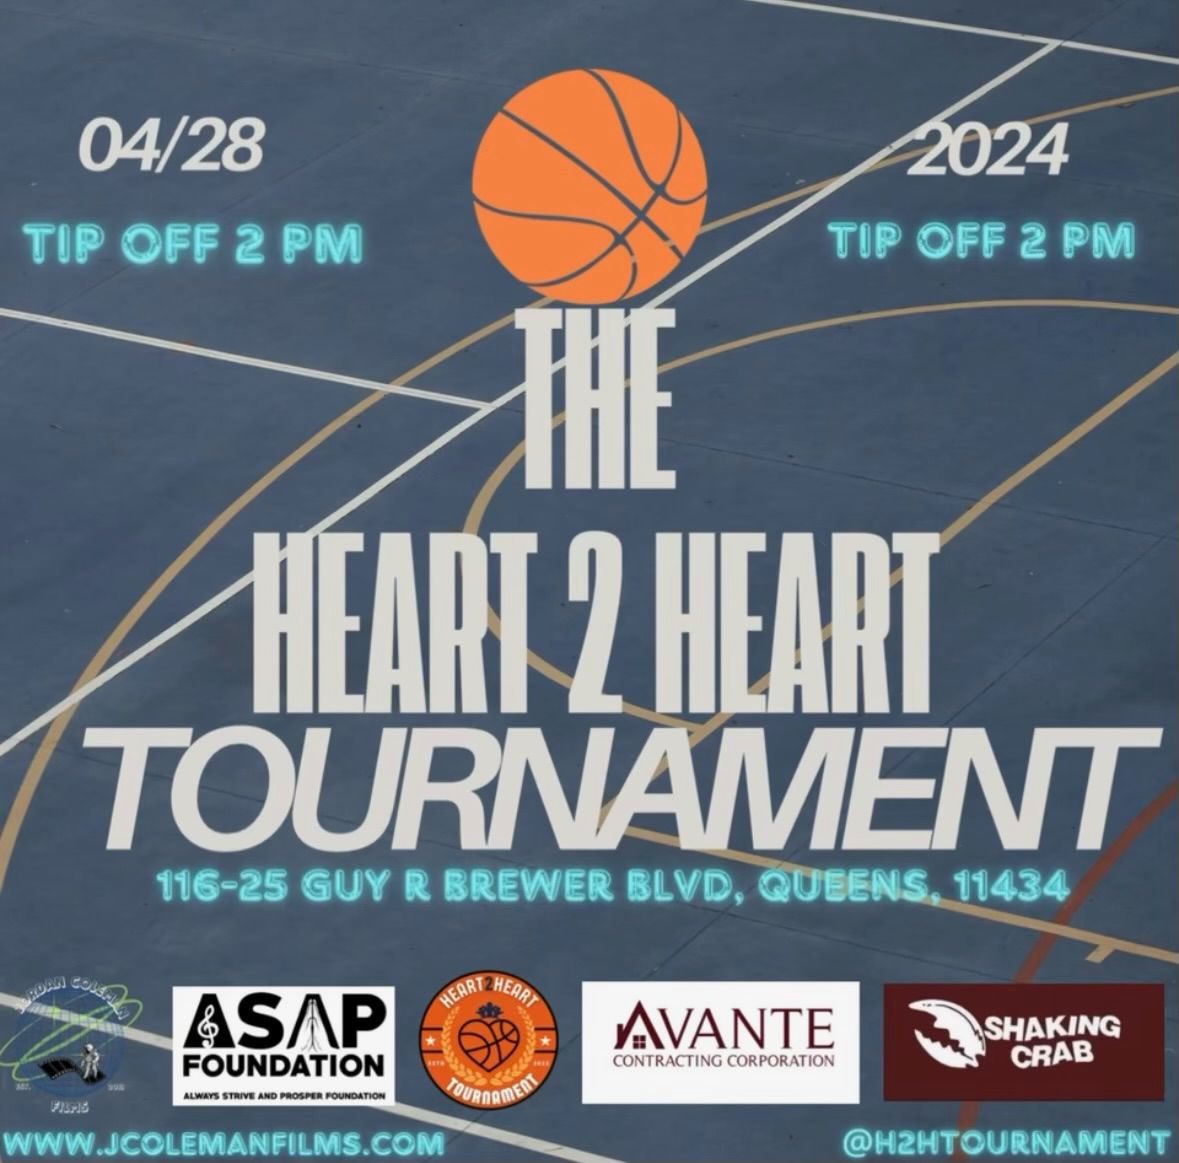 The Heart 2 Heart tournament is free for all to attend tomorrow, April 28th at 116-25 Guy R Brewer Boulevard, Queens. Tipoff is 2PM! Visit the website for more information!